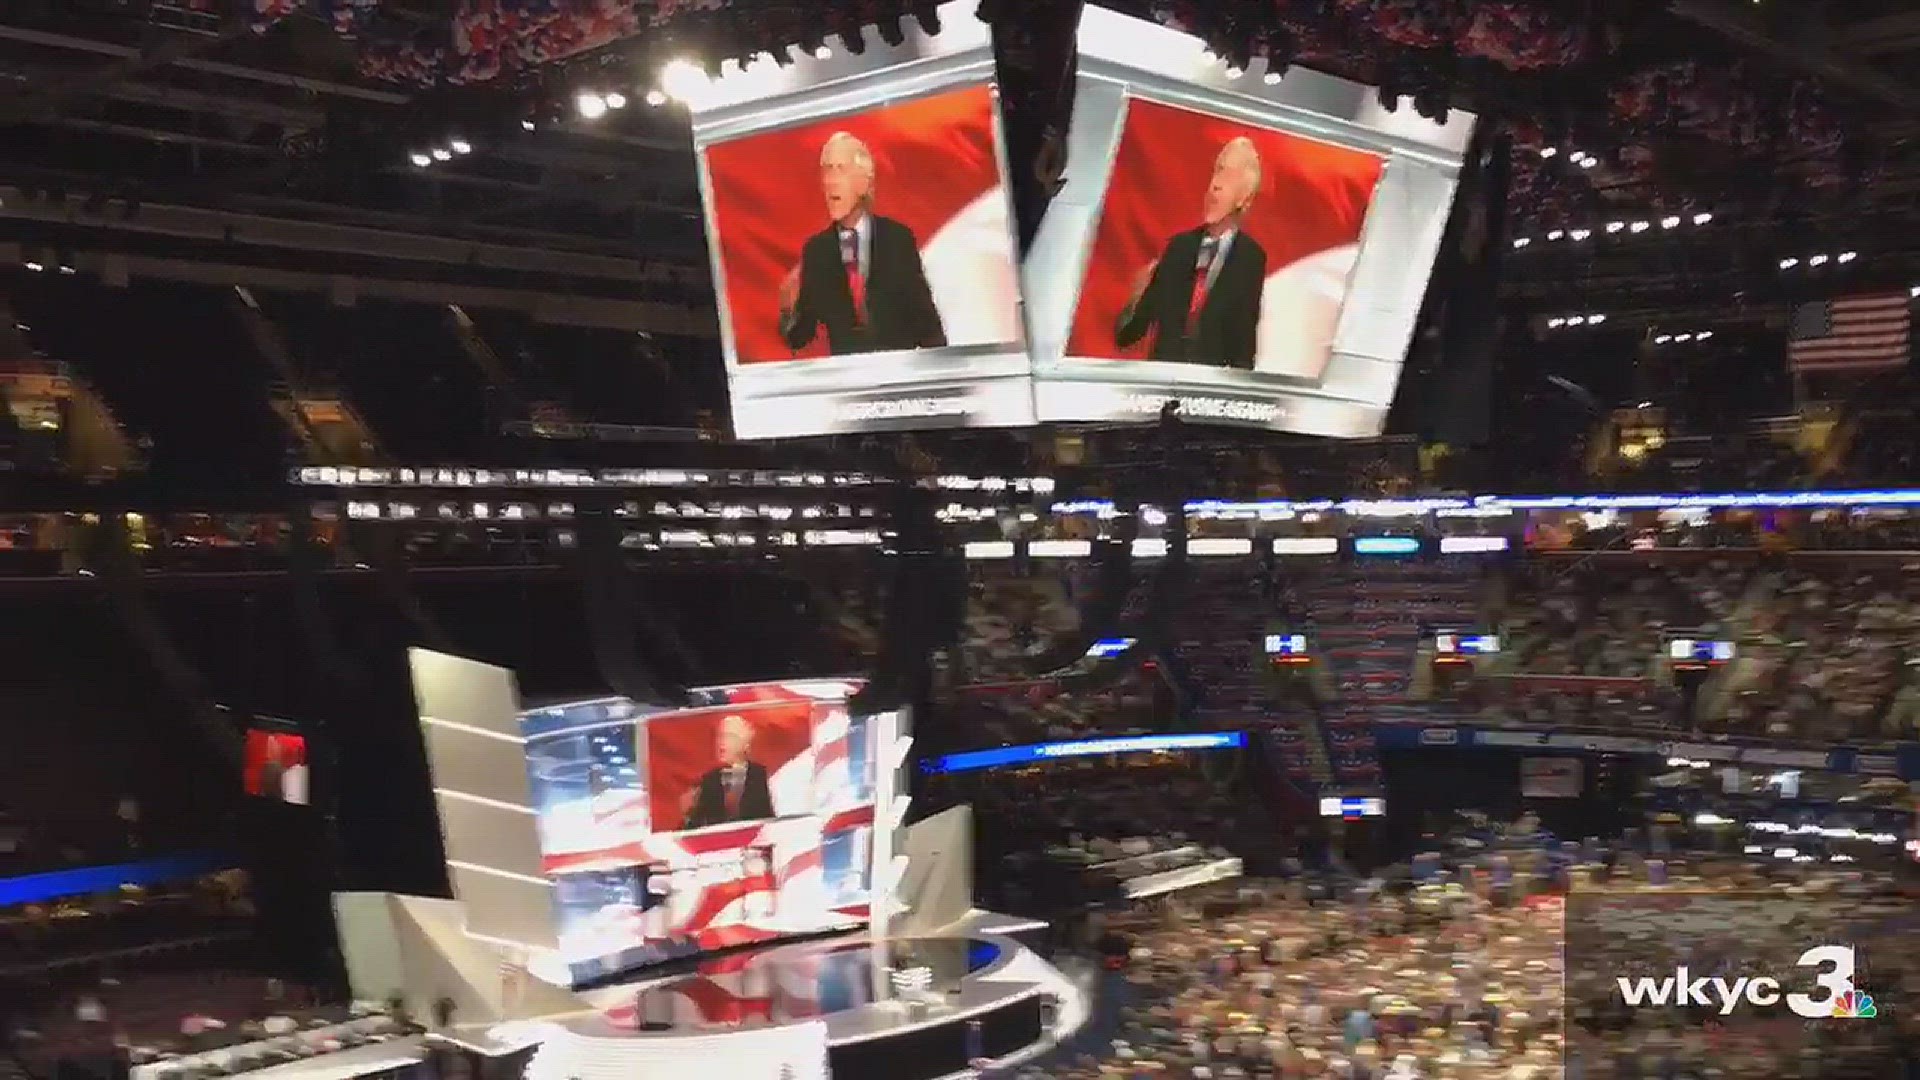 Former NFL quarterback Fran Tarkenton addresses the crowd at the The Republican National Convention.